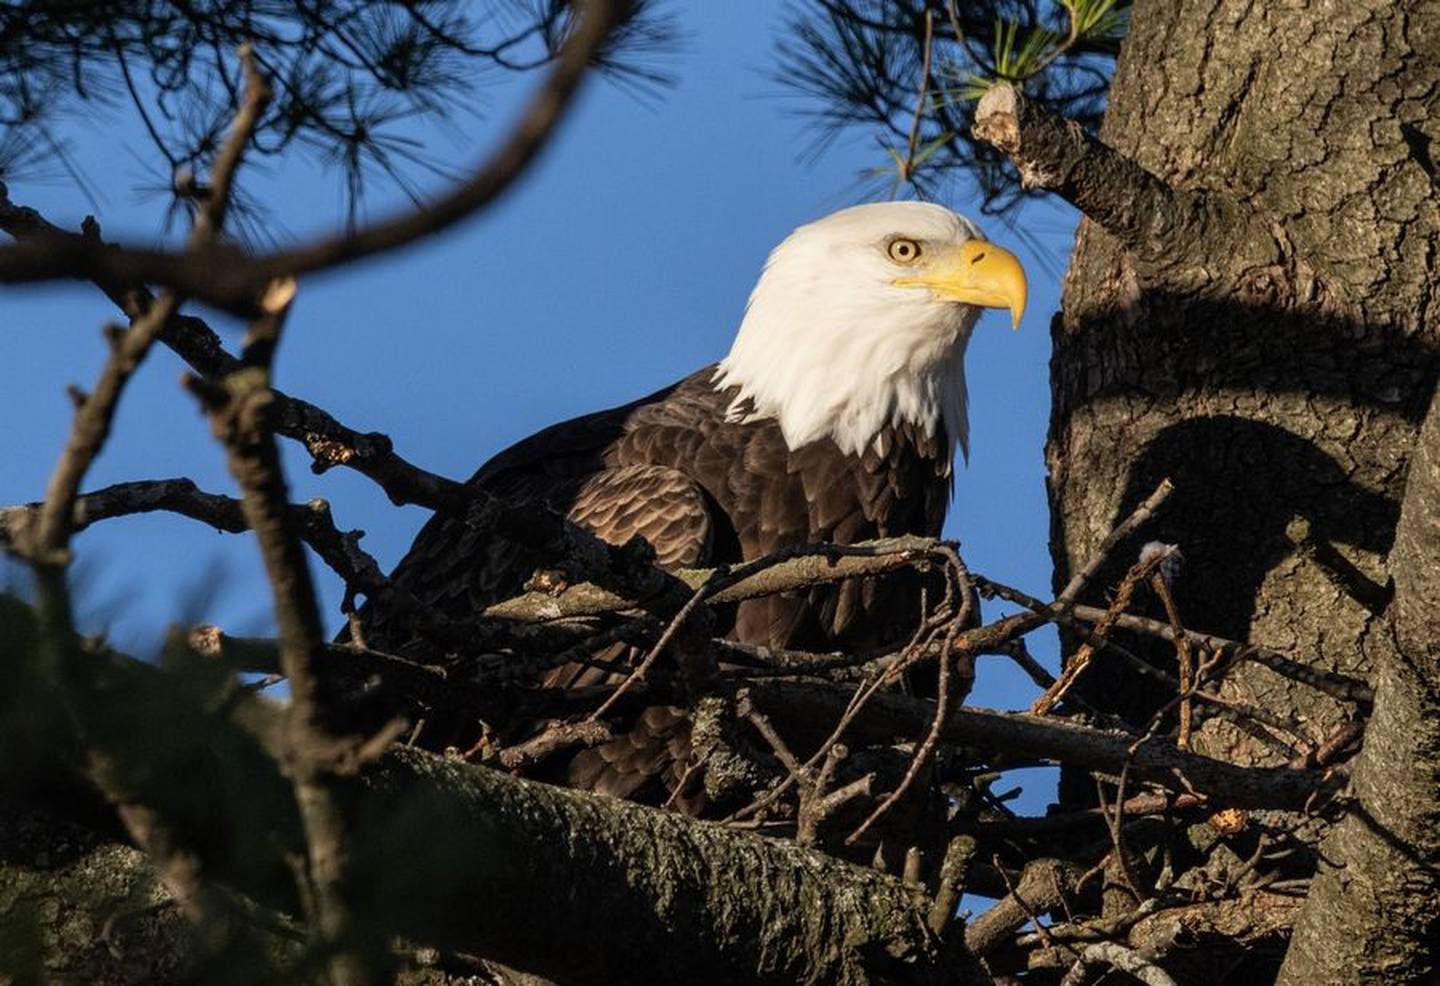 The female eagle on the Mooseheart grounds has been there for at least a dozen years.